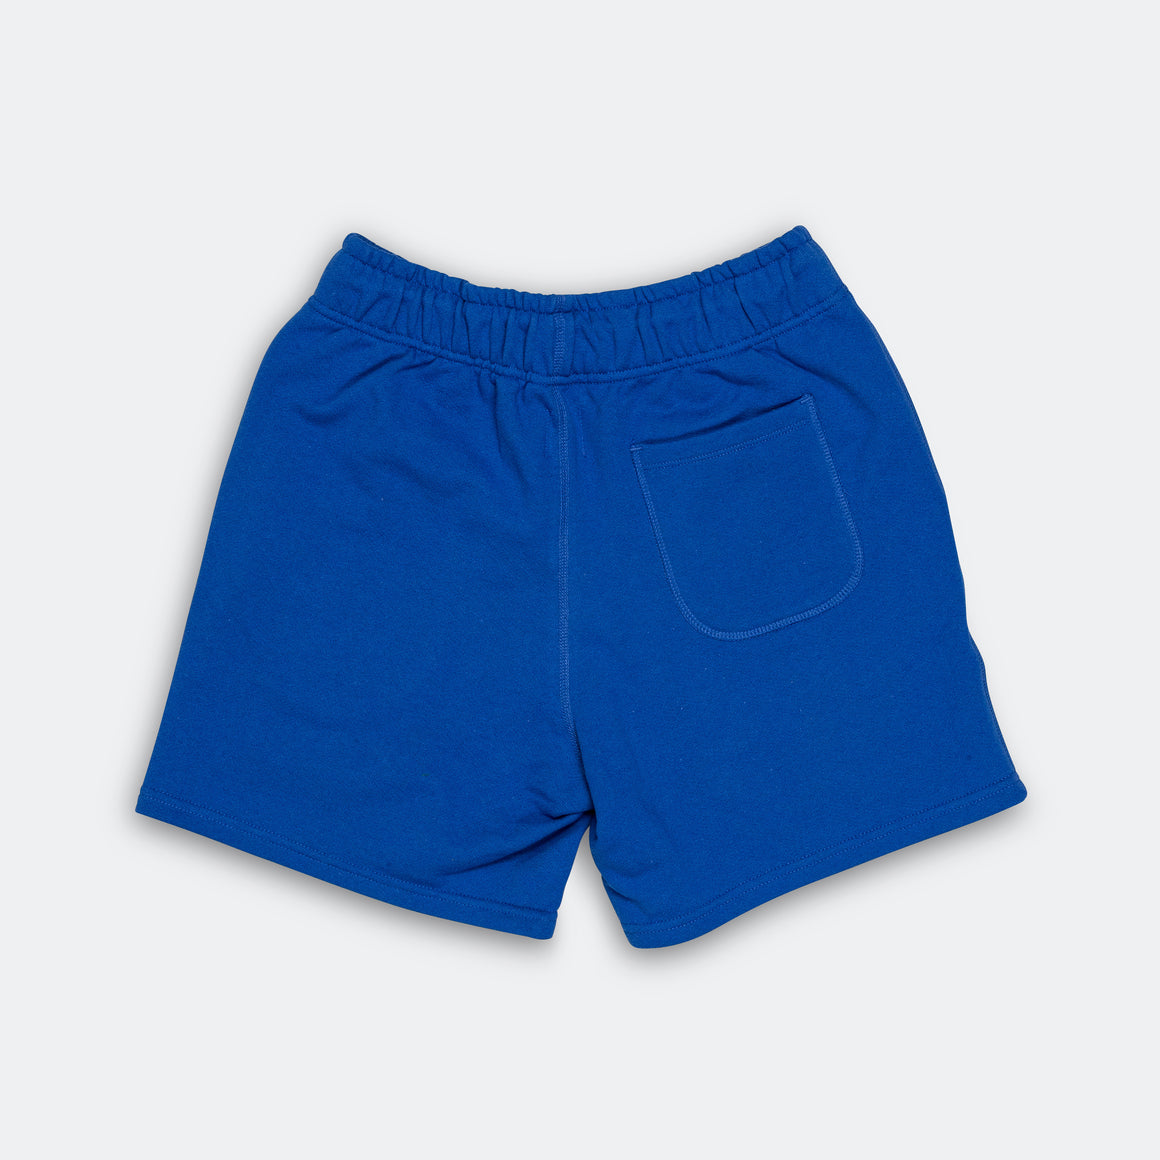 New Balance - MADE in USA Sweat Short - Team Royal - UP THERE